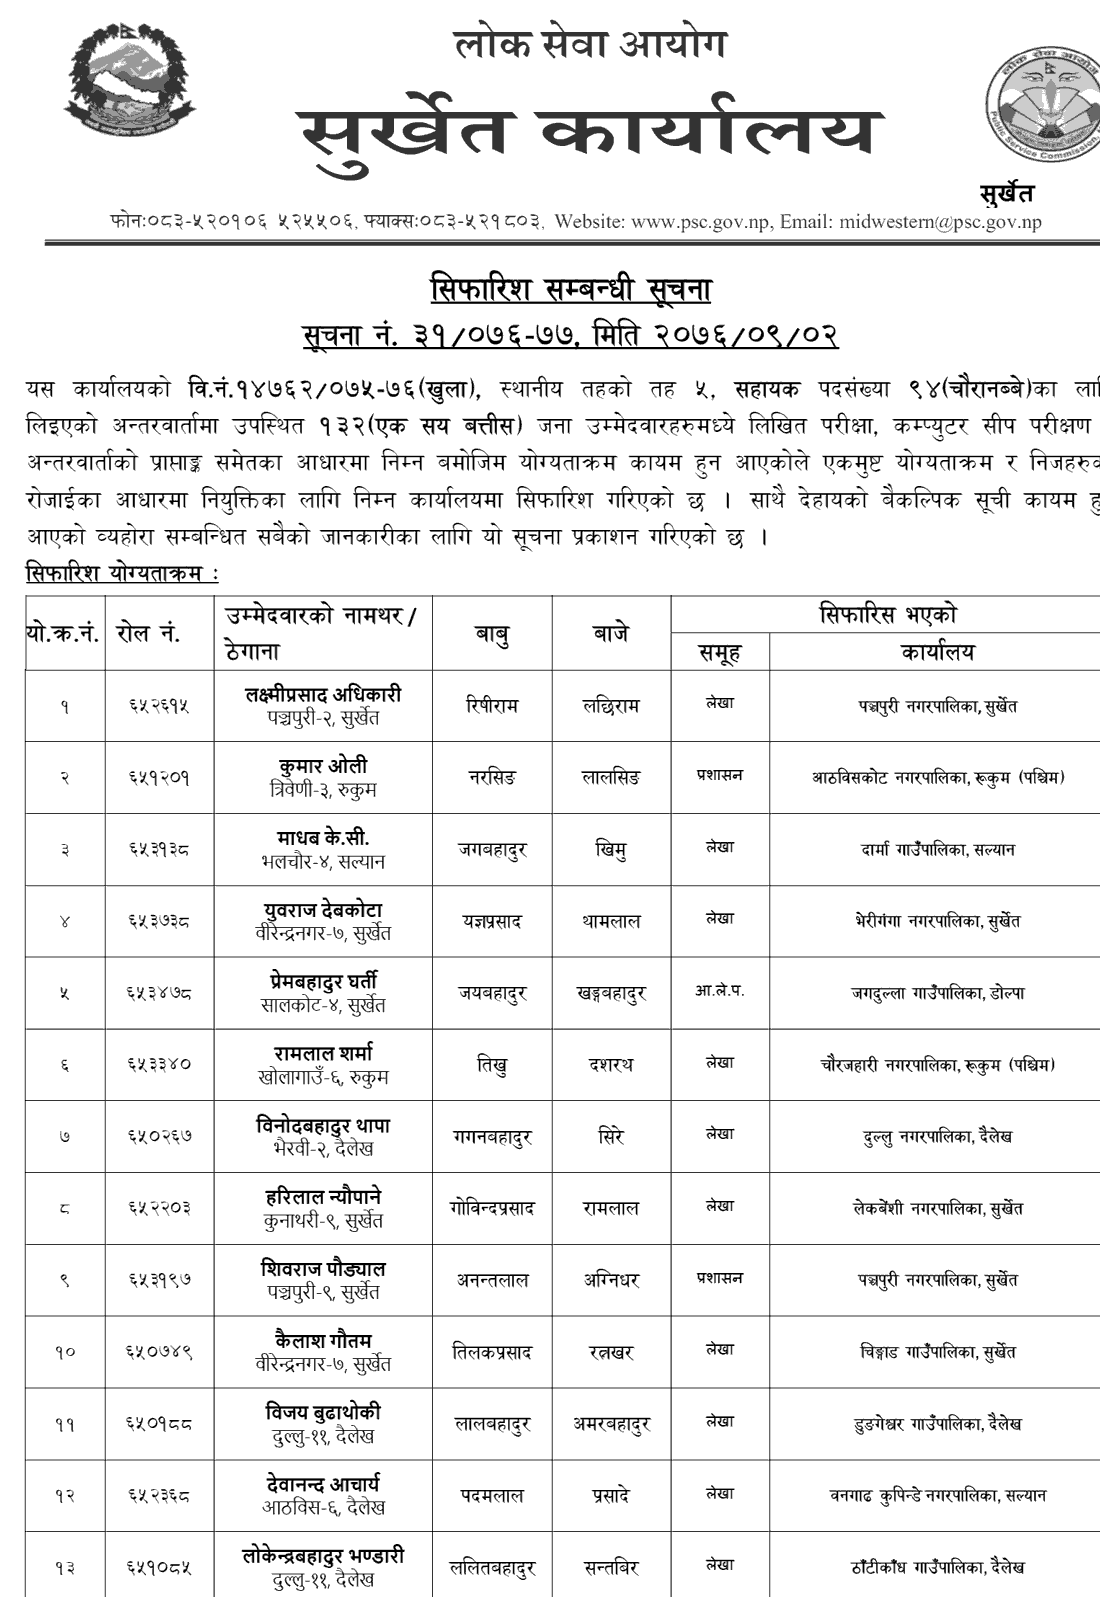 Loksewa Aayog Local Level 5th Assistant Final Result and Appointment